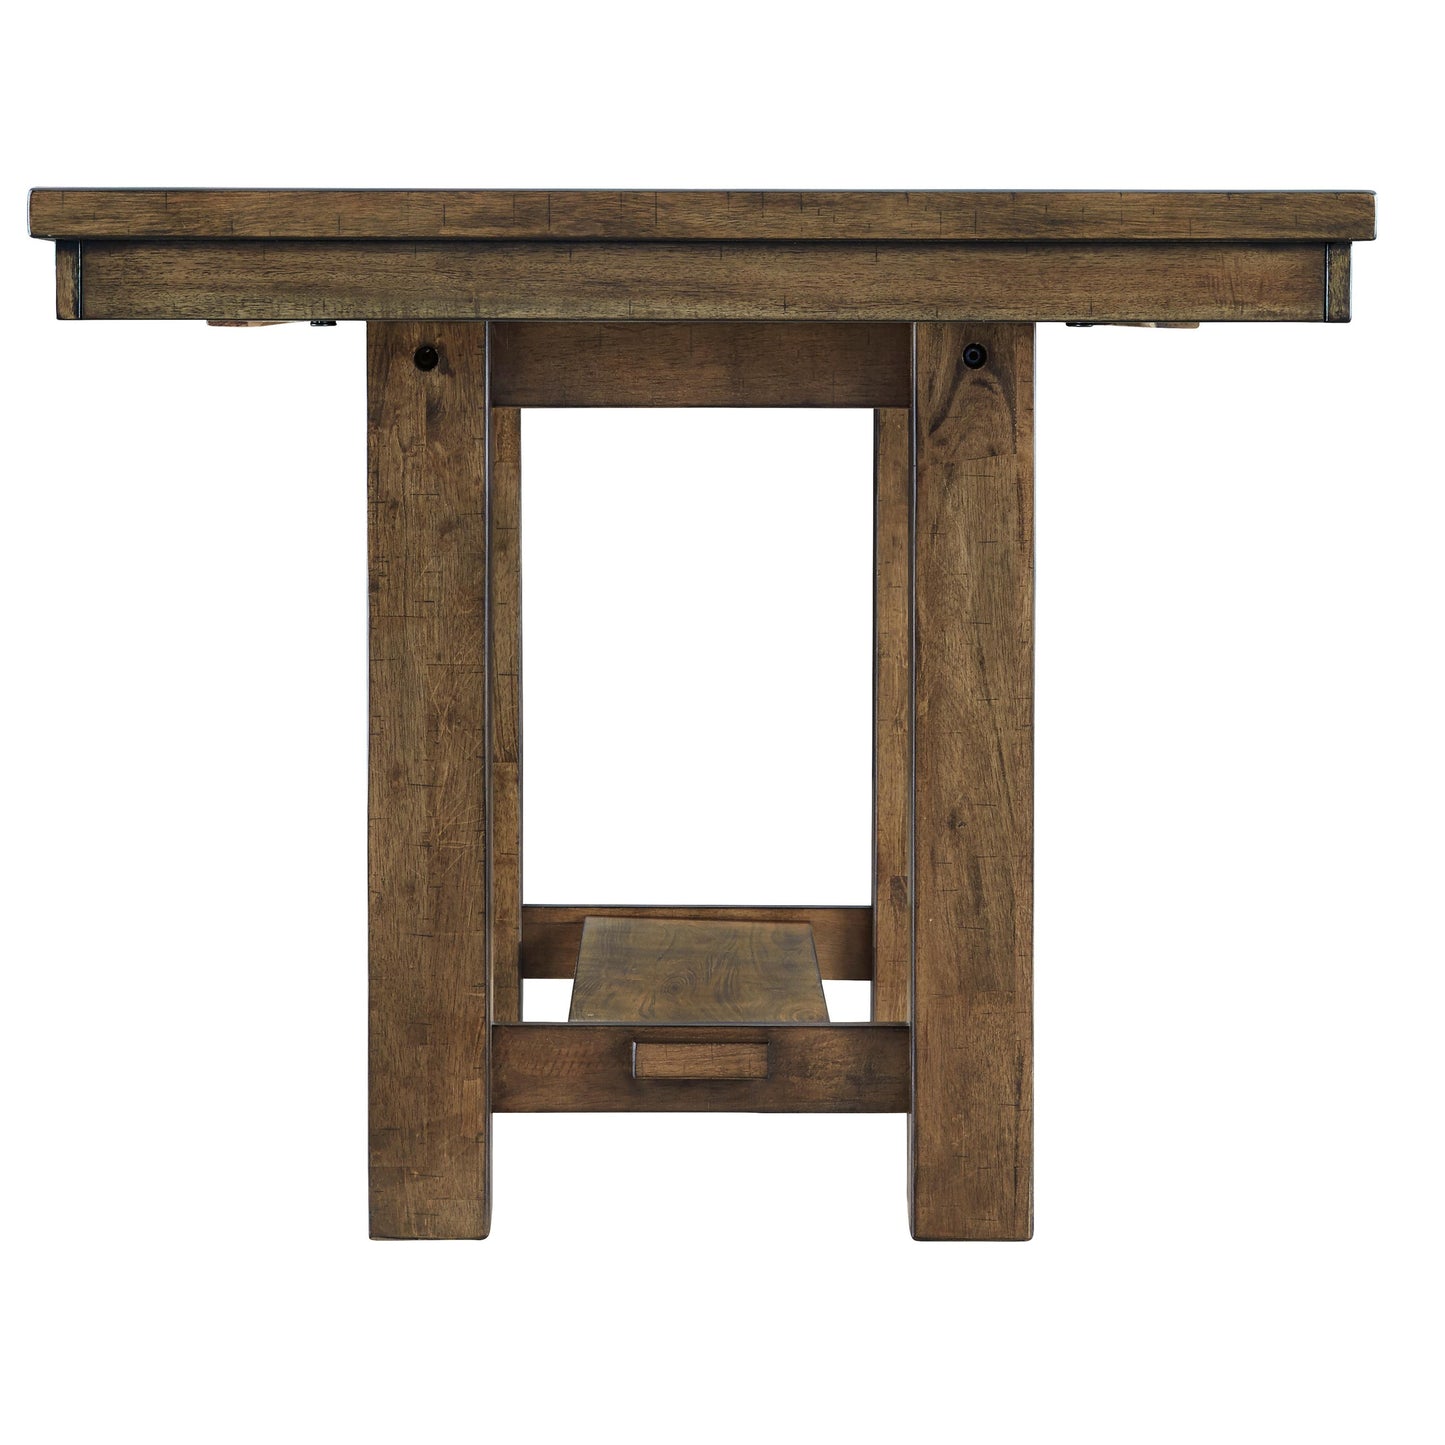 Signature Design by Ashley Moriville Dining Table with Trestle Base D631-45